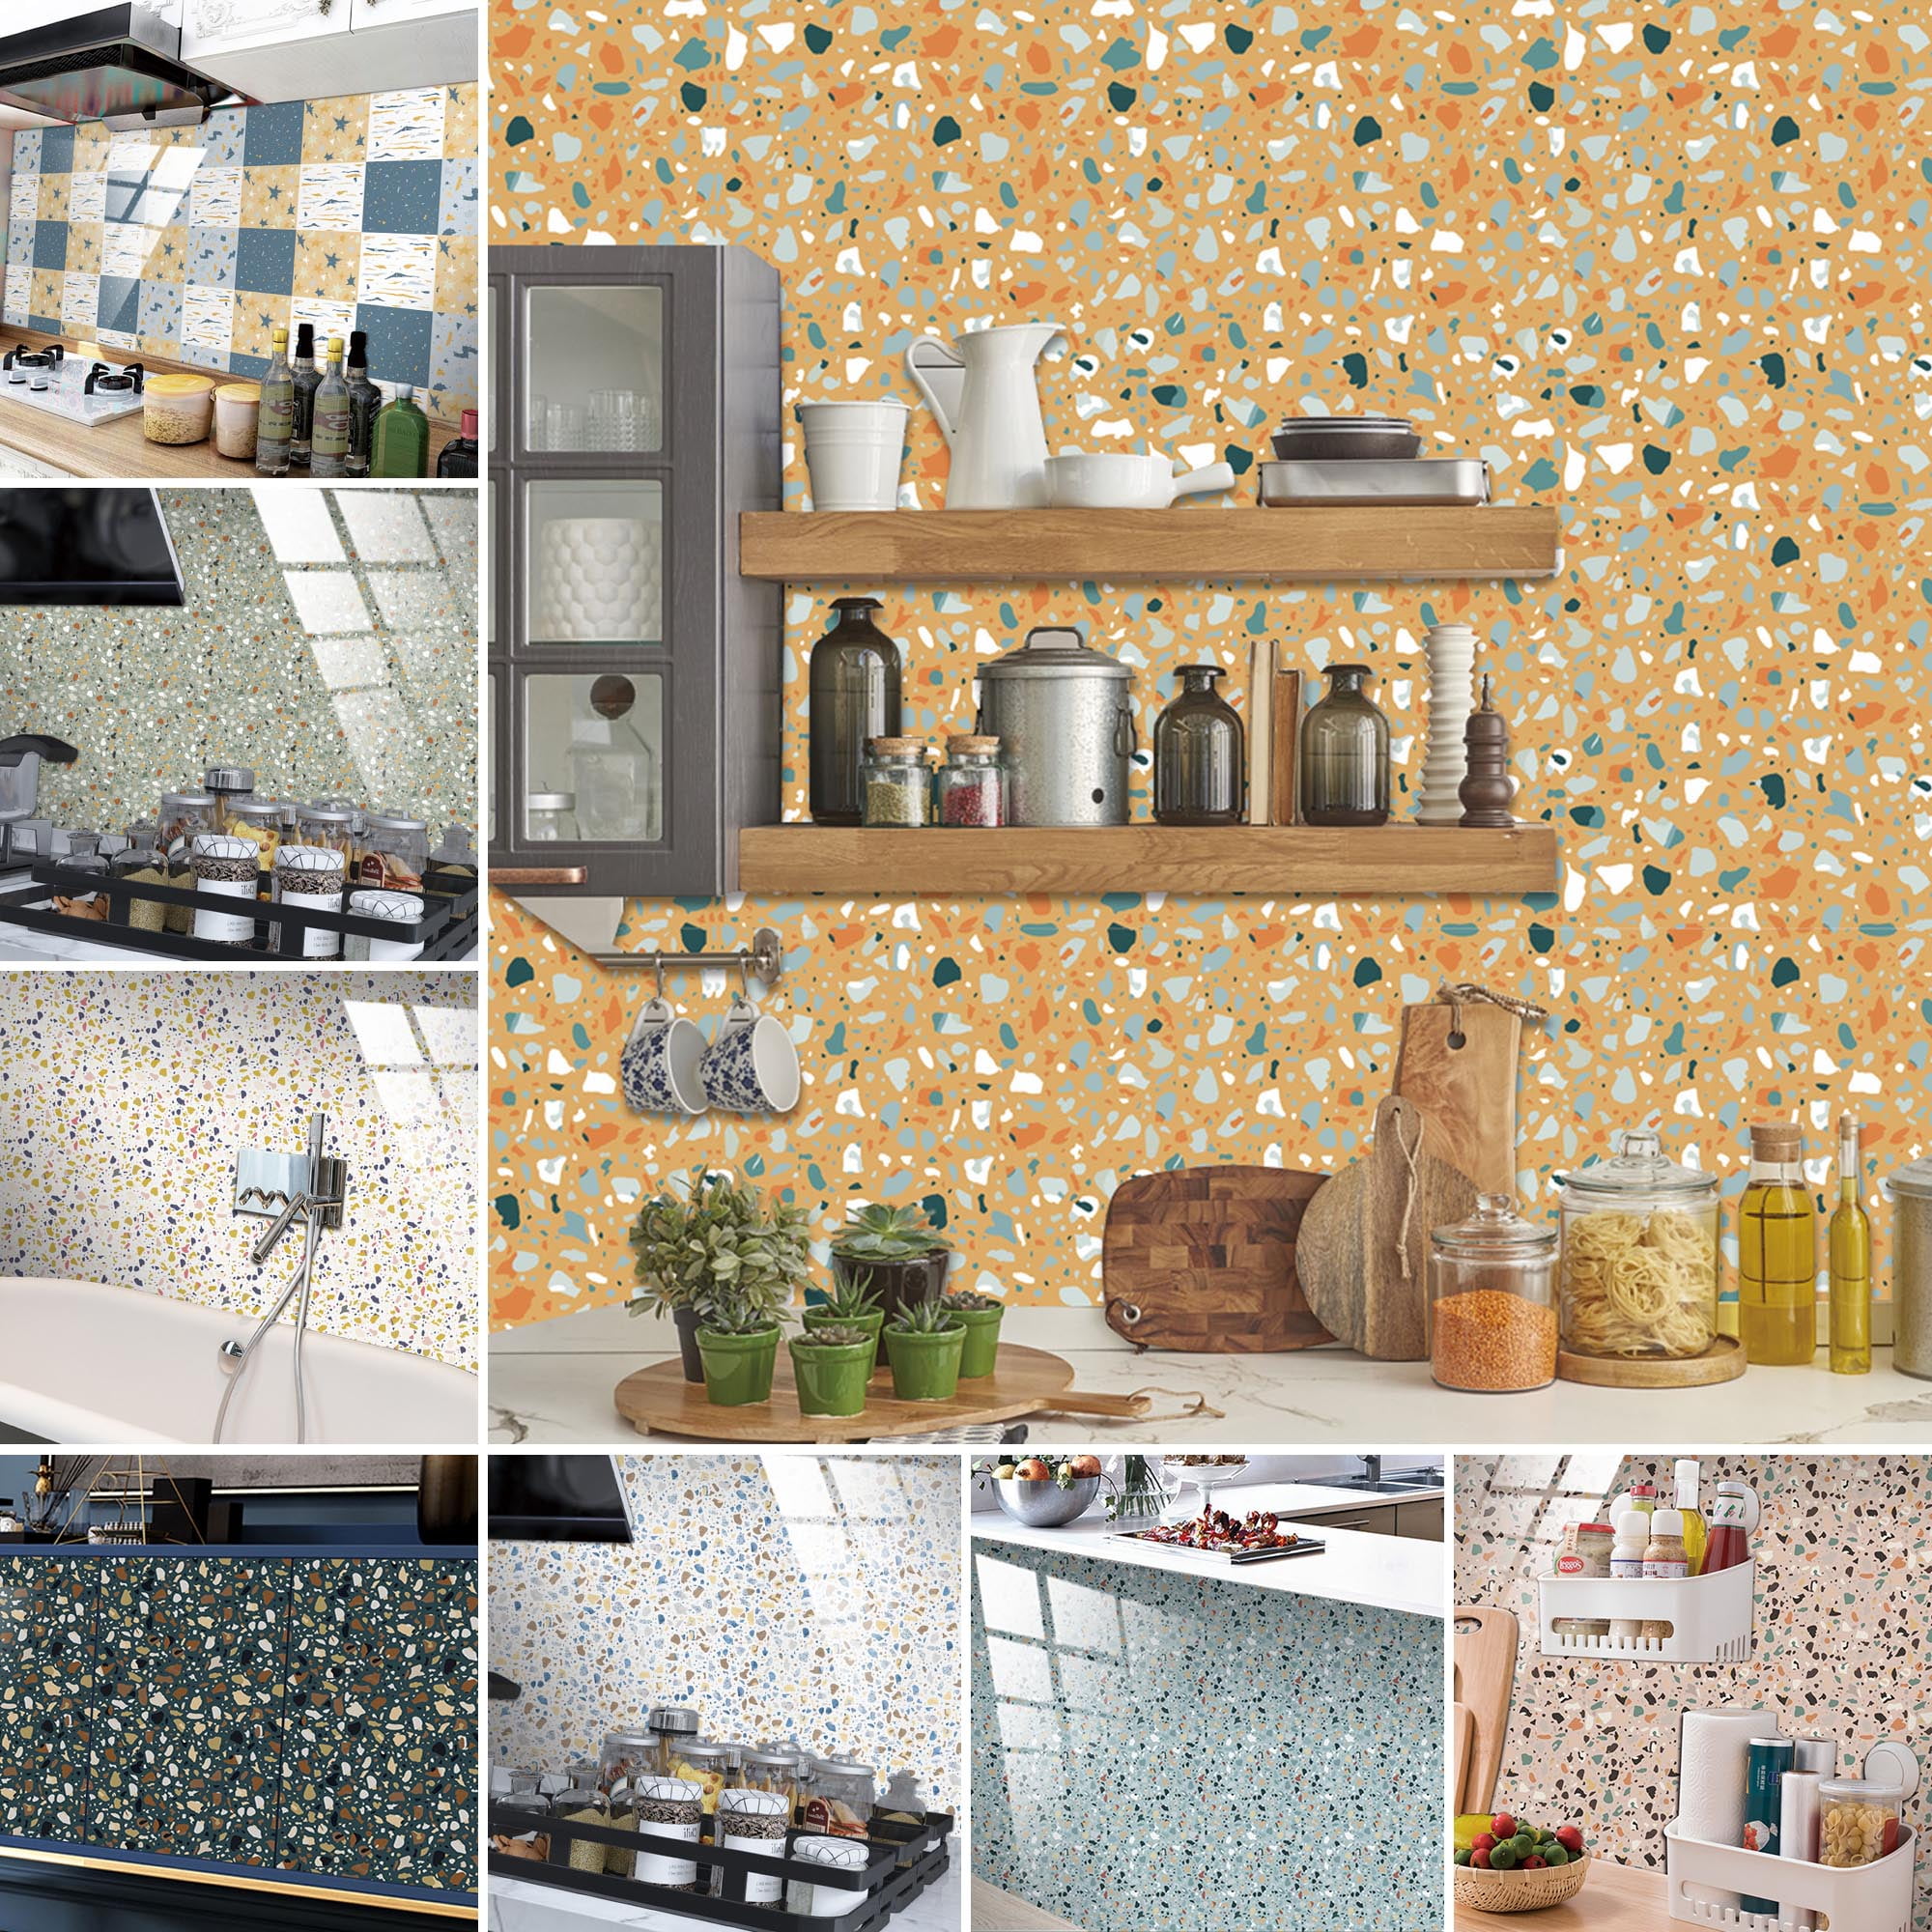 3D Mosaic Sticker Kitchen Tile Stickers Bathroom Self-adhesive Wall Decor Home